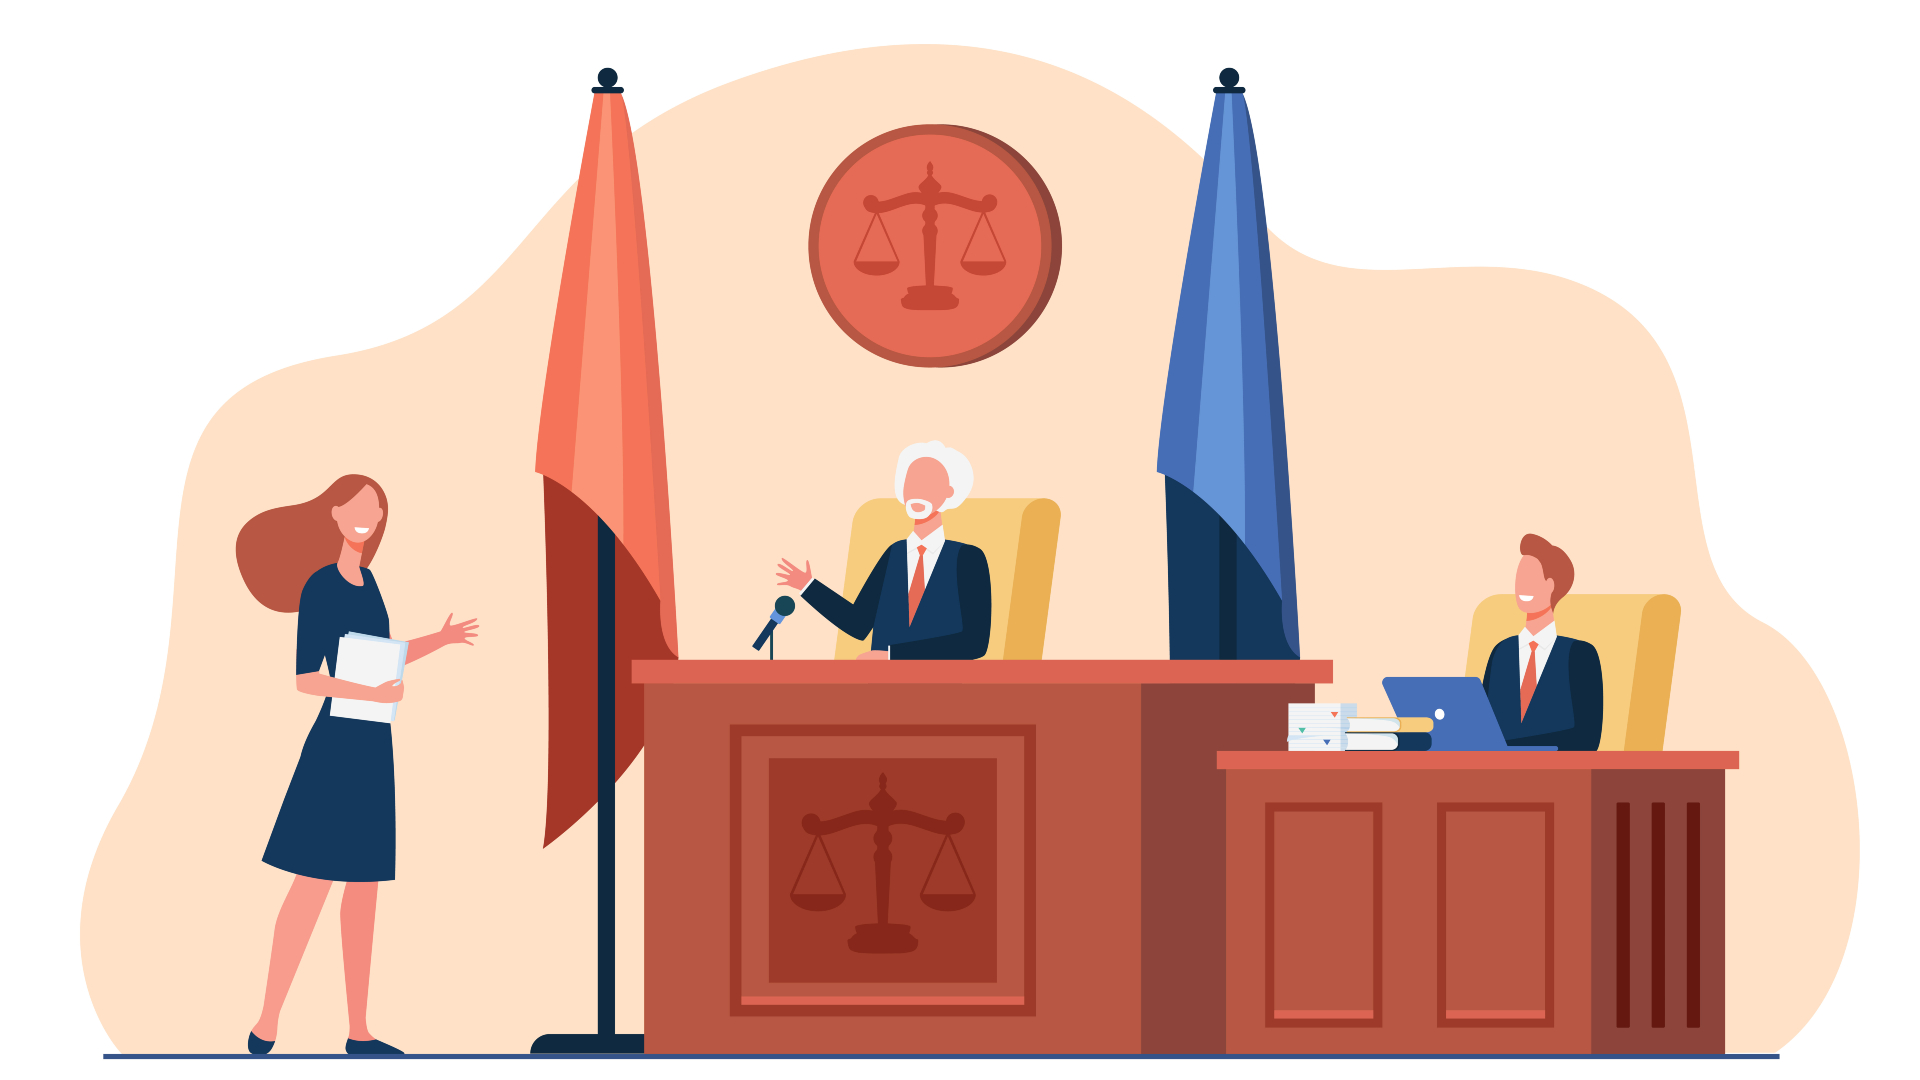 An illustration of a judge, a lawyer and a witness in a court